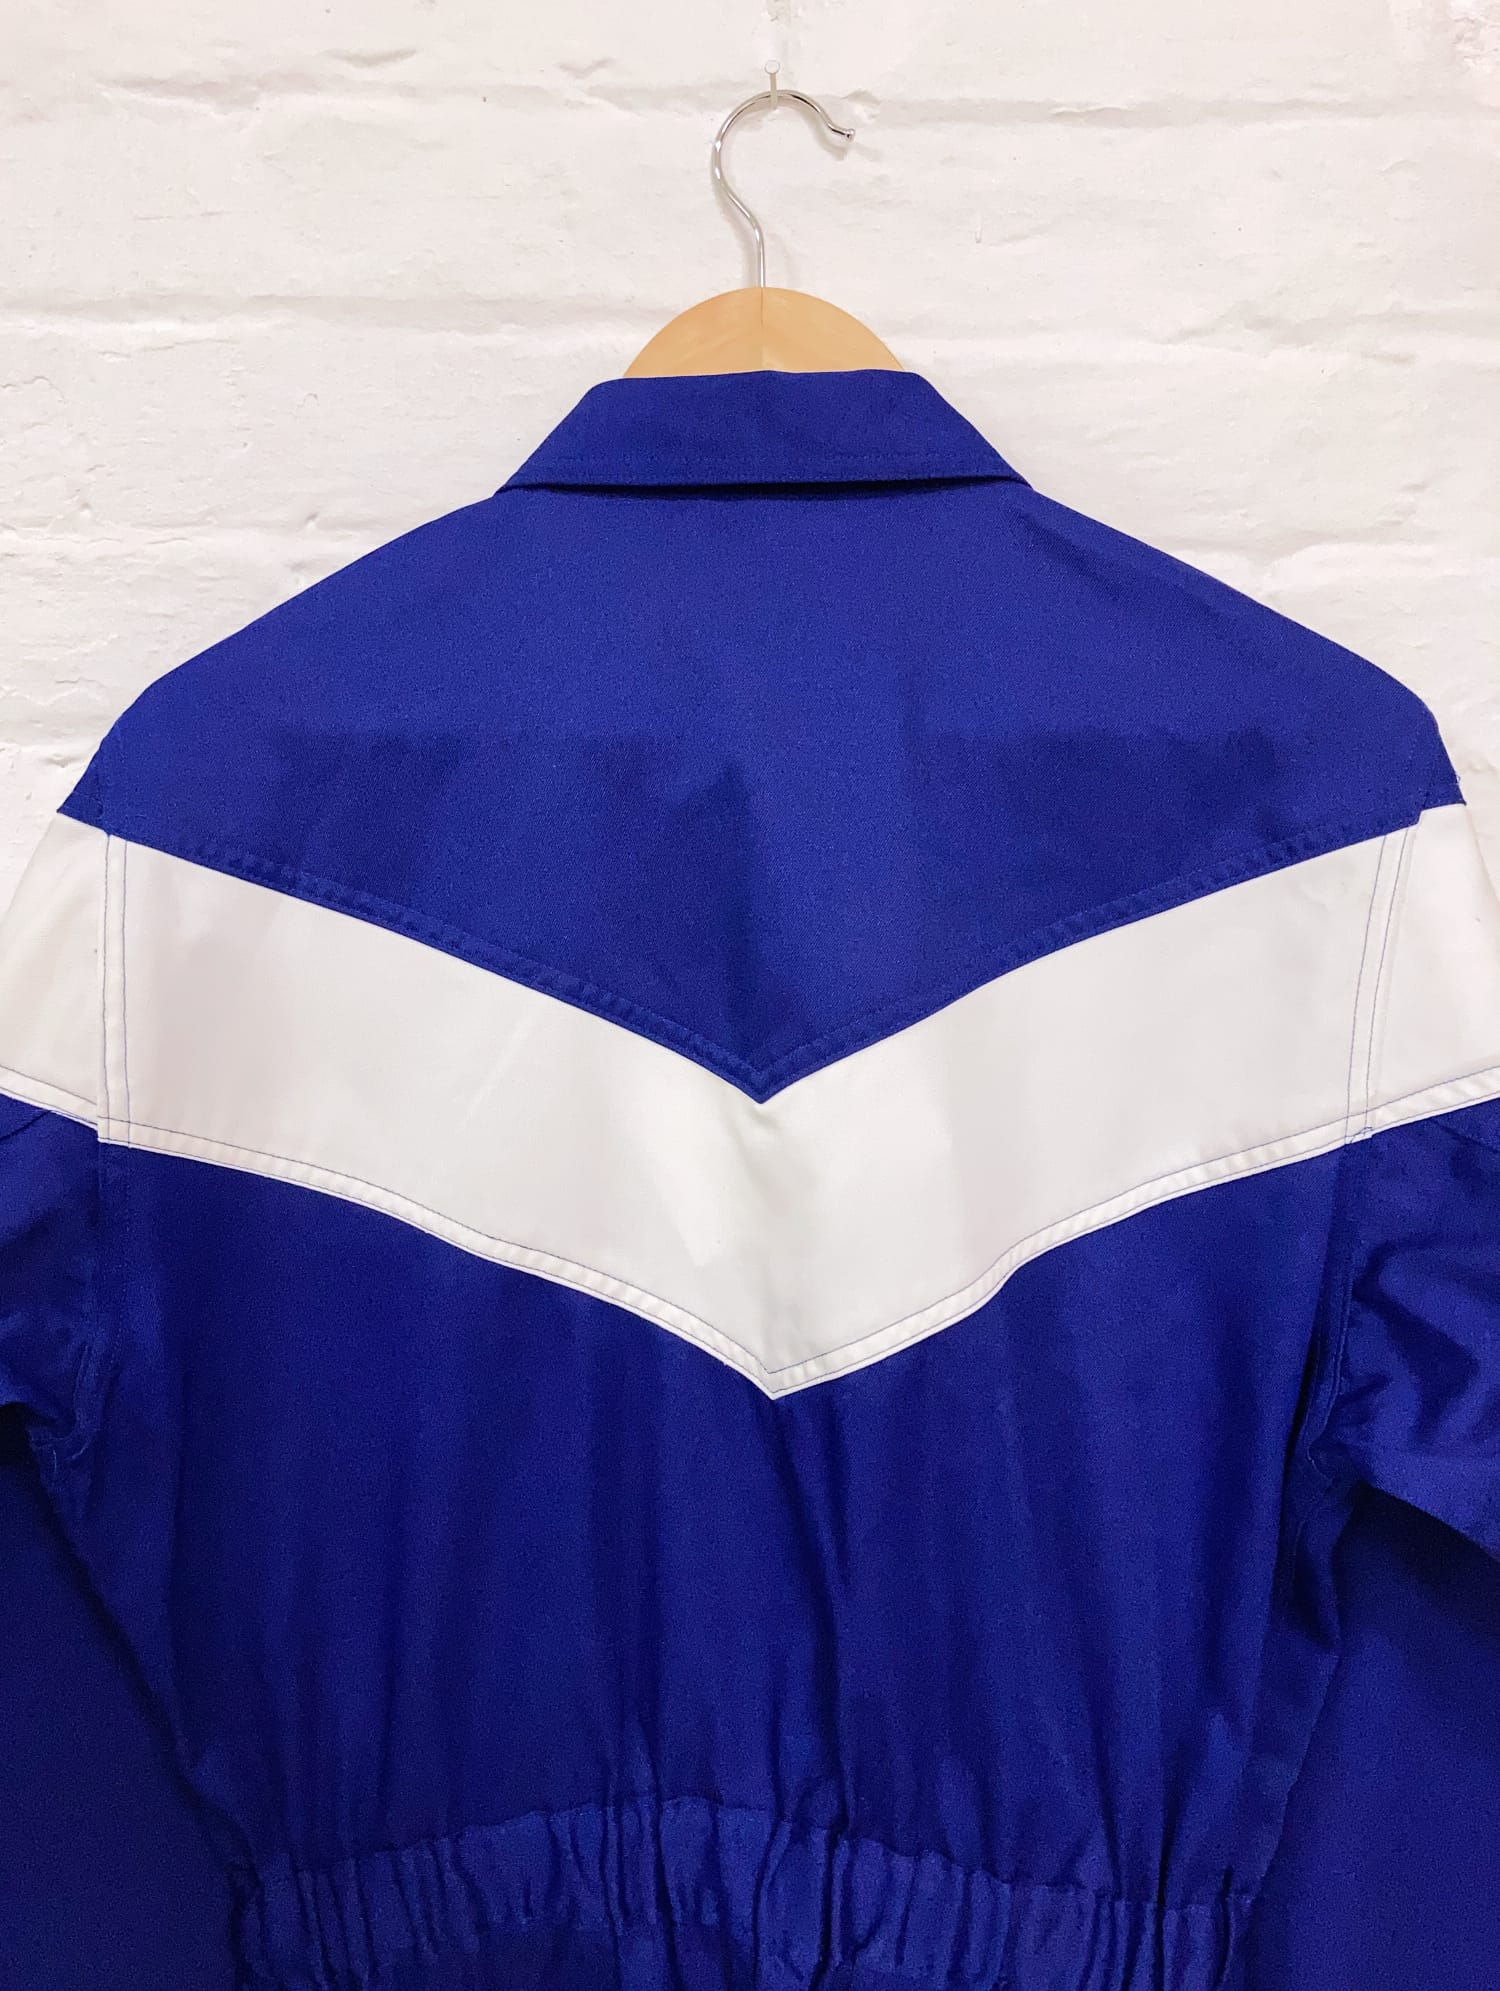 Courreges Homme 1980s blue and white twill jumpsuit